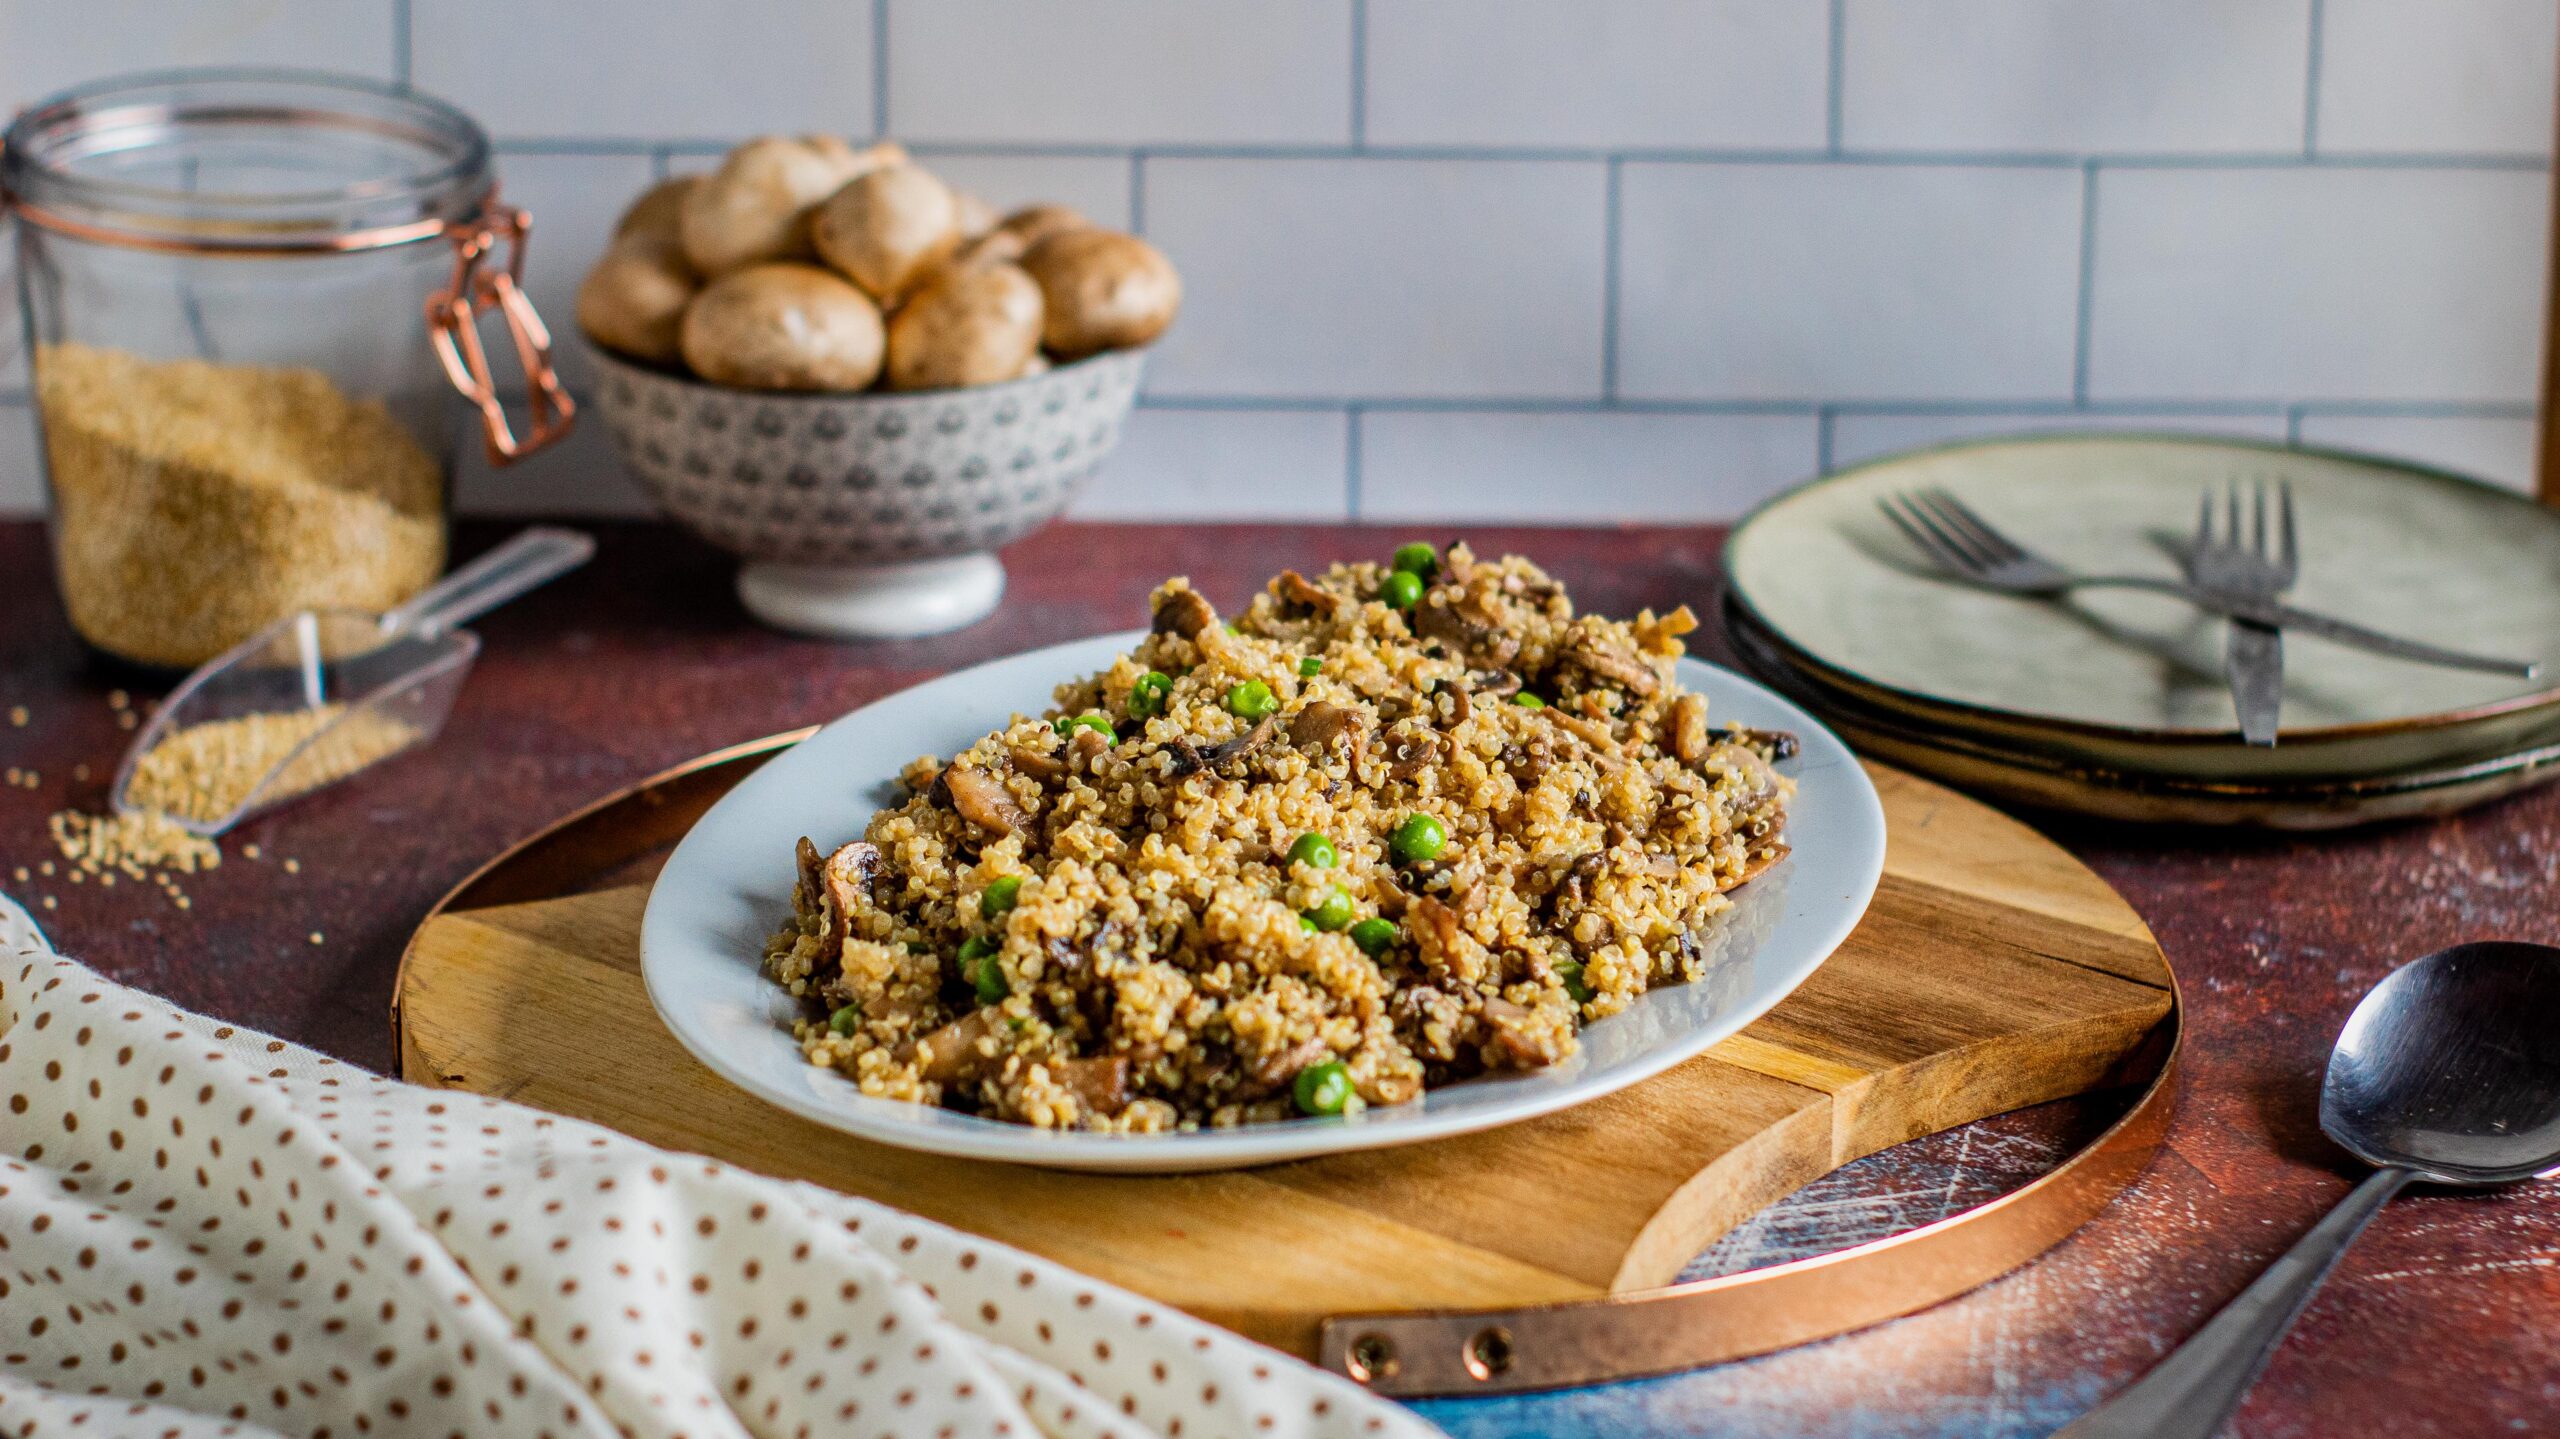  Comfort food never tasted so good with our Quinoa Pilaf recipe!